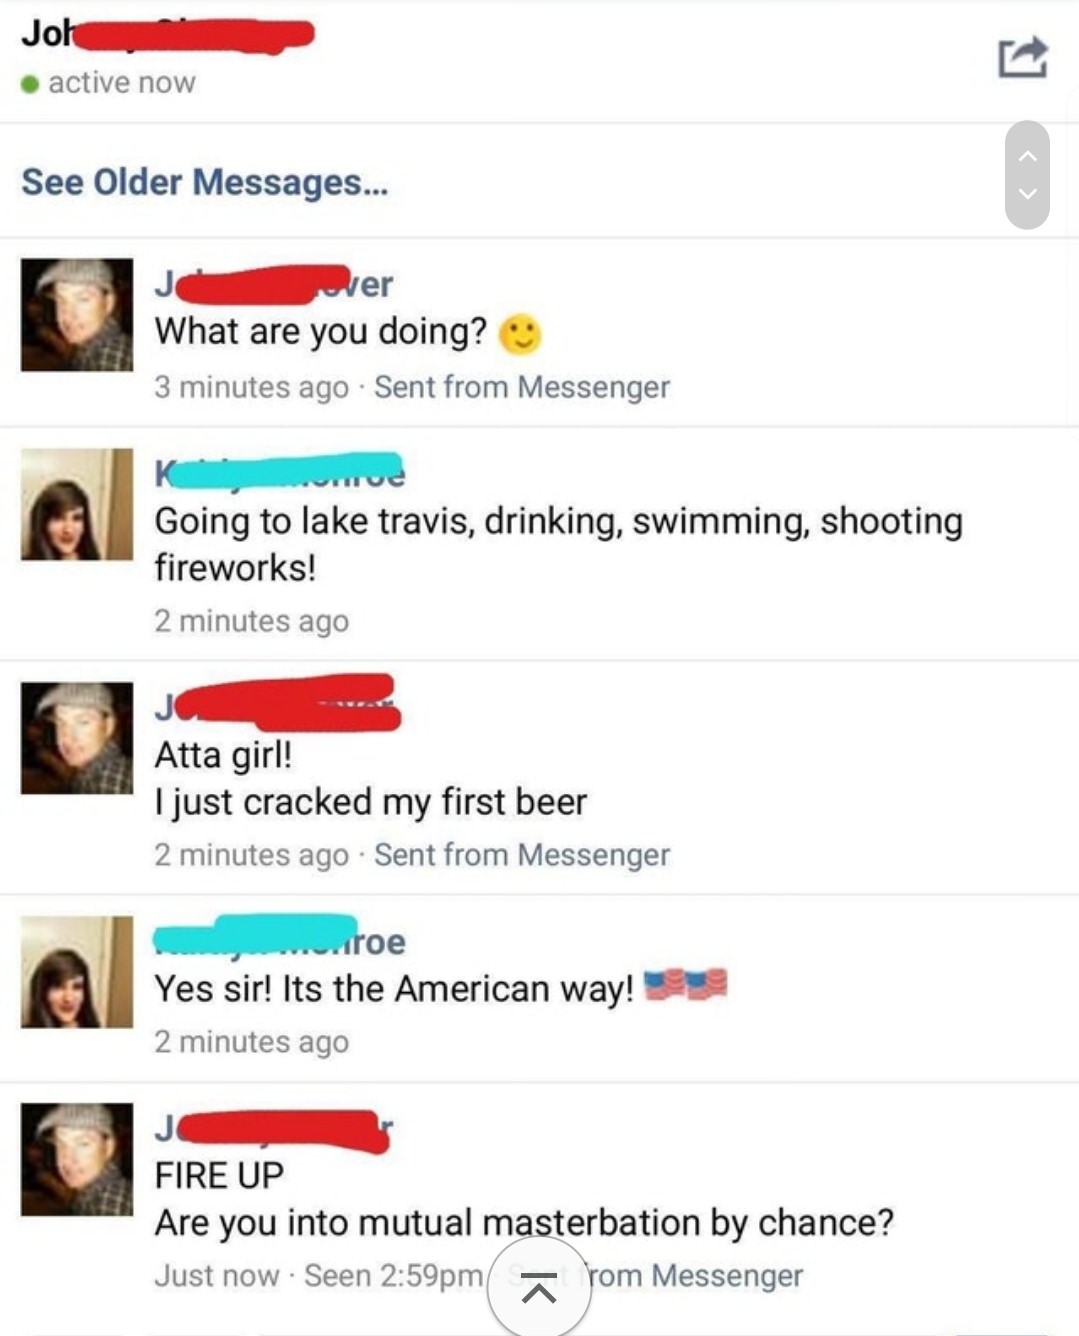 cringe web page - Joh .active now See Older Messages... wer What are you doing? 3 minutes ago Sent from Messenger Going to lake travis, drinking, swimming, shooting fireworks! 2 minutes ago Atta girl! I just cracked my first beer 2 minutes ago Sent from M